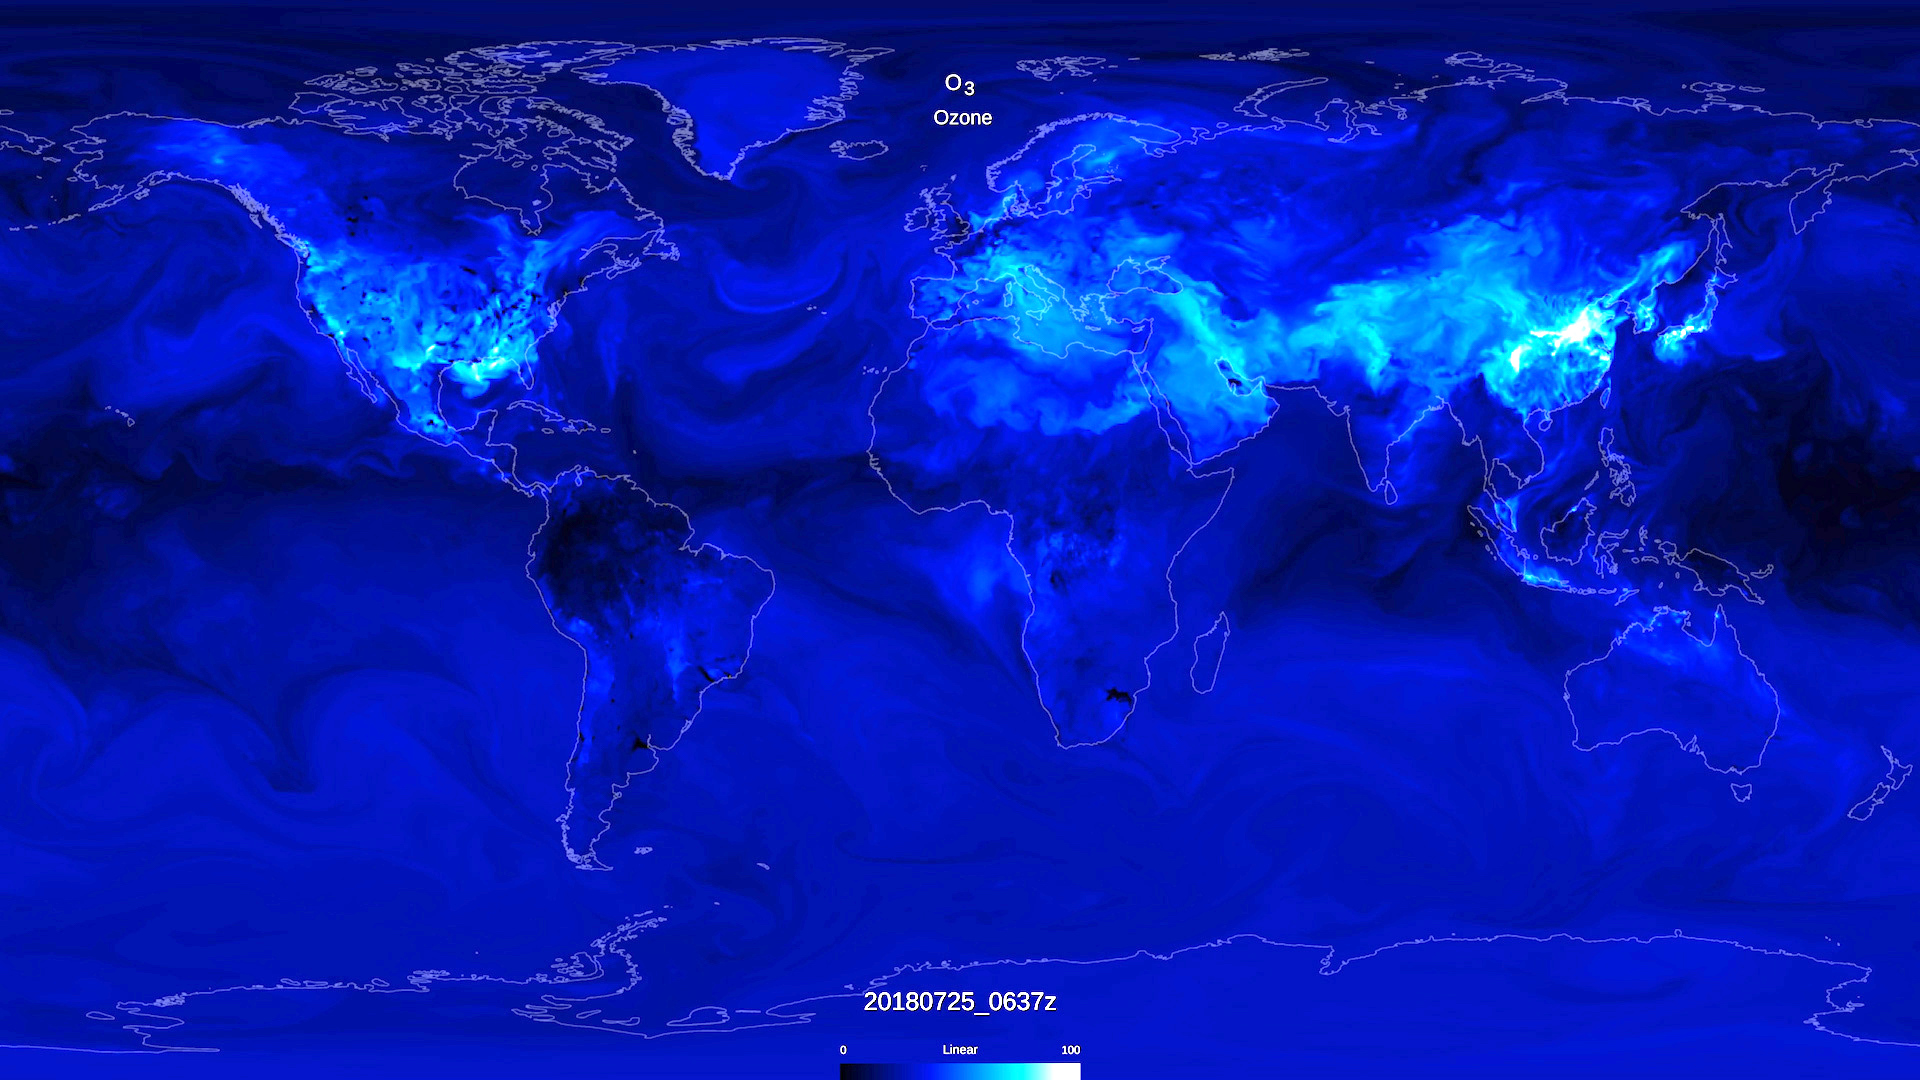 World map showing tropospheric ozone data, with high values over land sources, represented by lighter blue swirls.